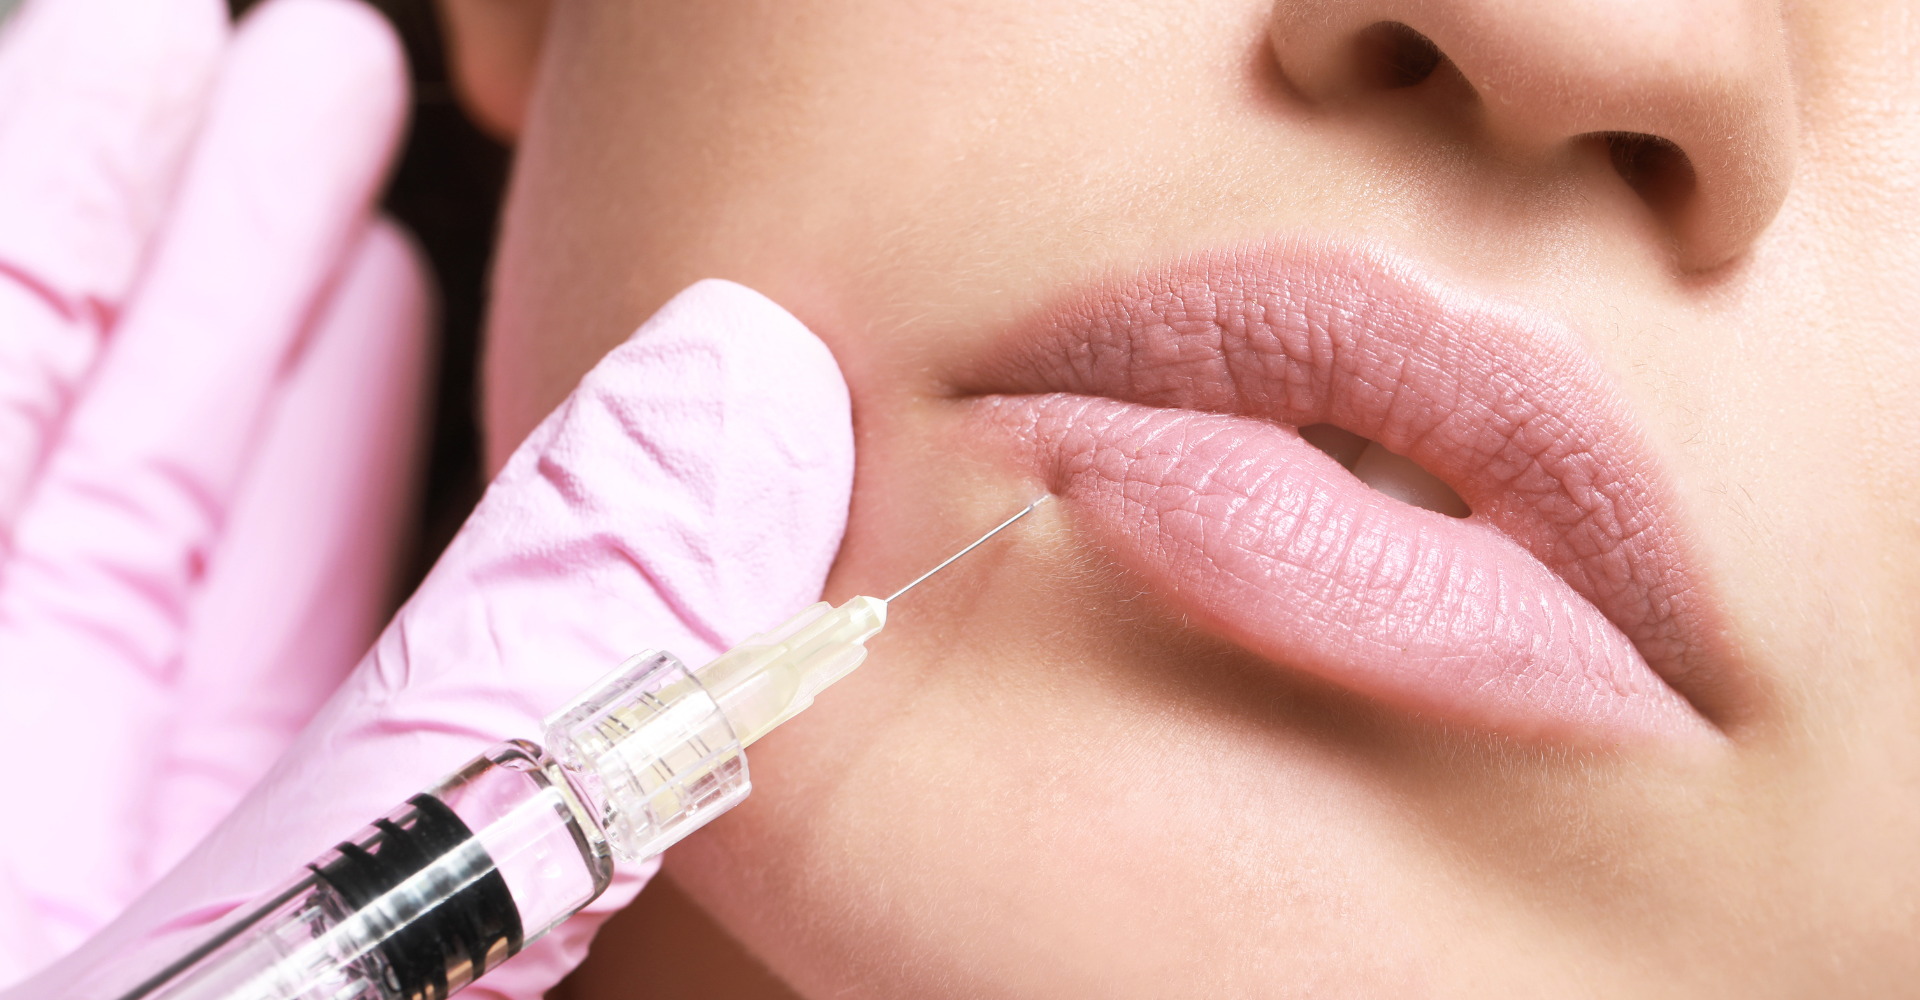 Injectable fillers